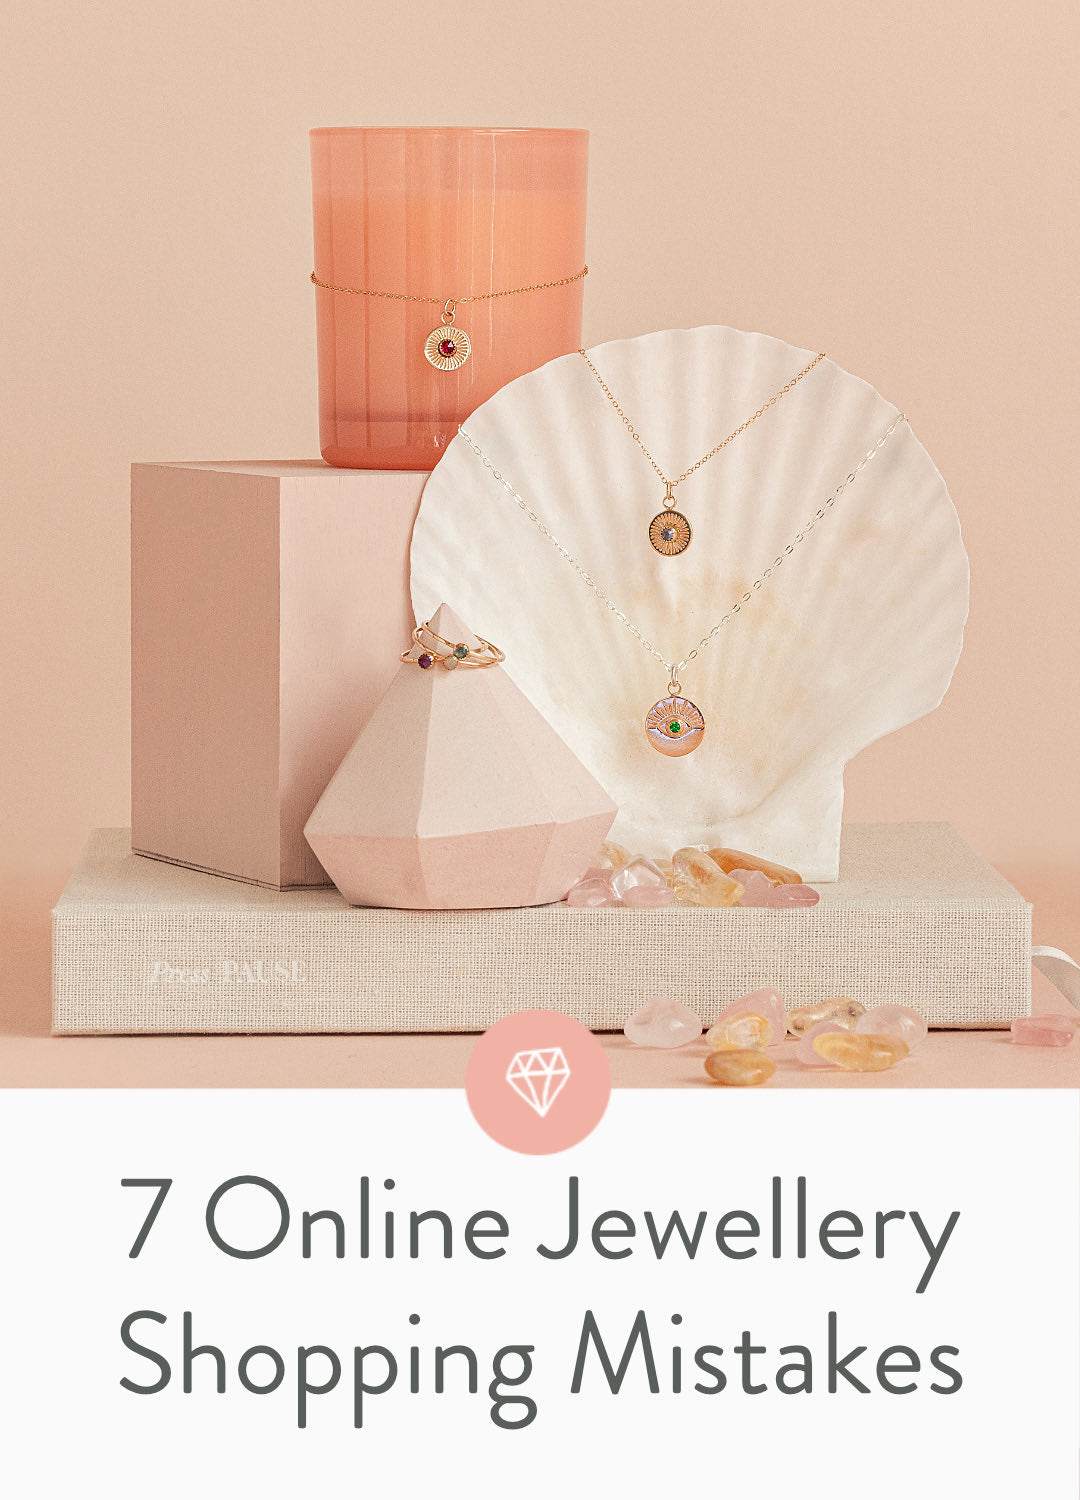 7 Online Jewellery Shopping Mistakes (and how to avoid them)